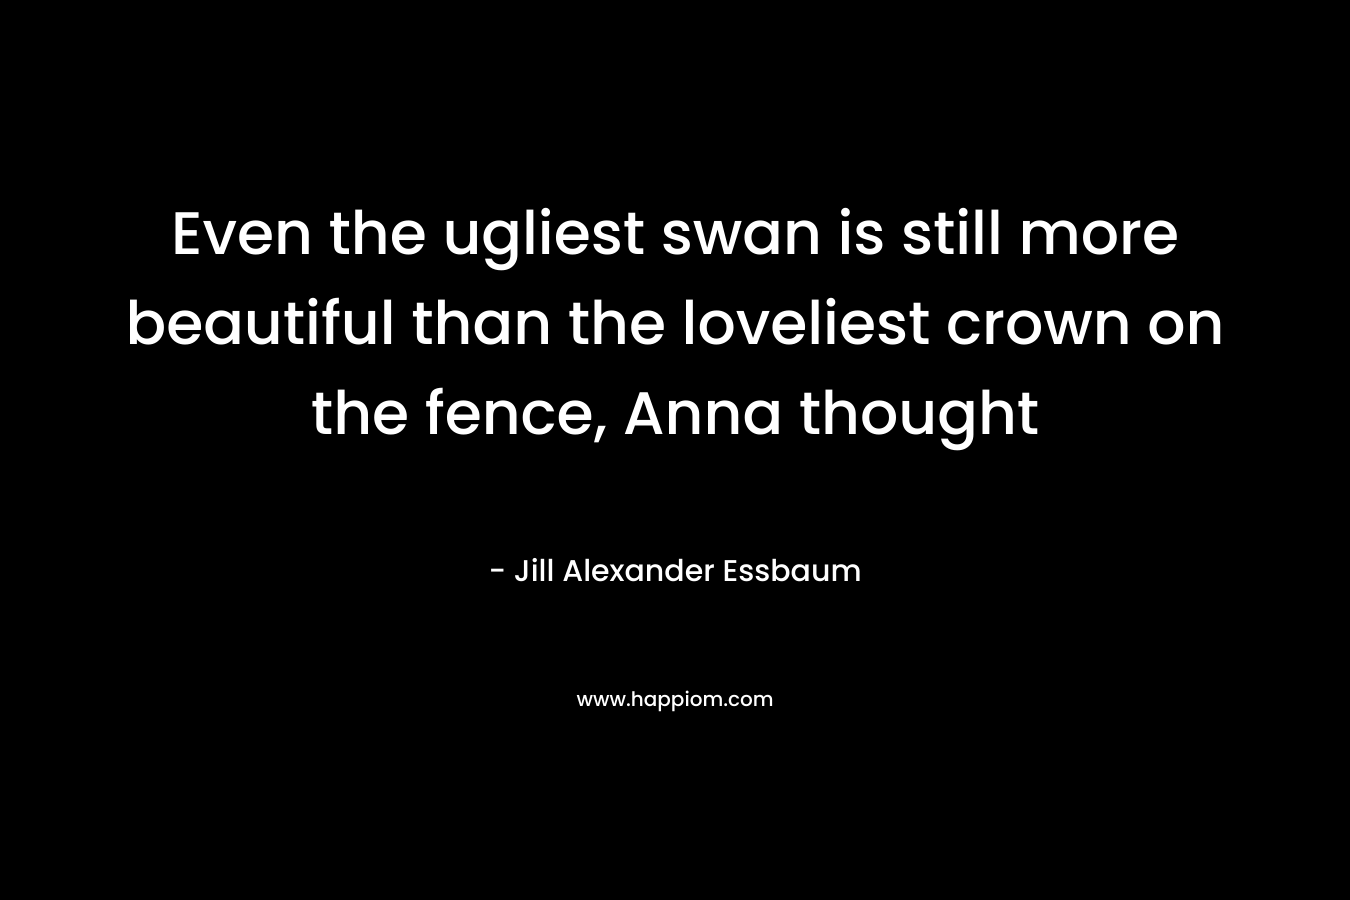 Even the ugliest swan is still more beautiful than the loveliest crown on the fence, Anna thought – Jill Alexander Essbaum